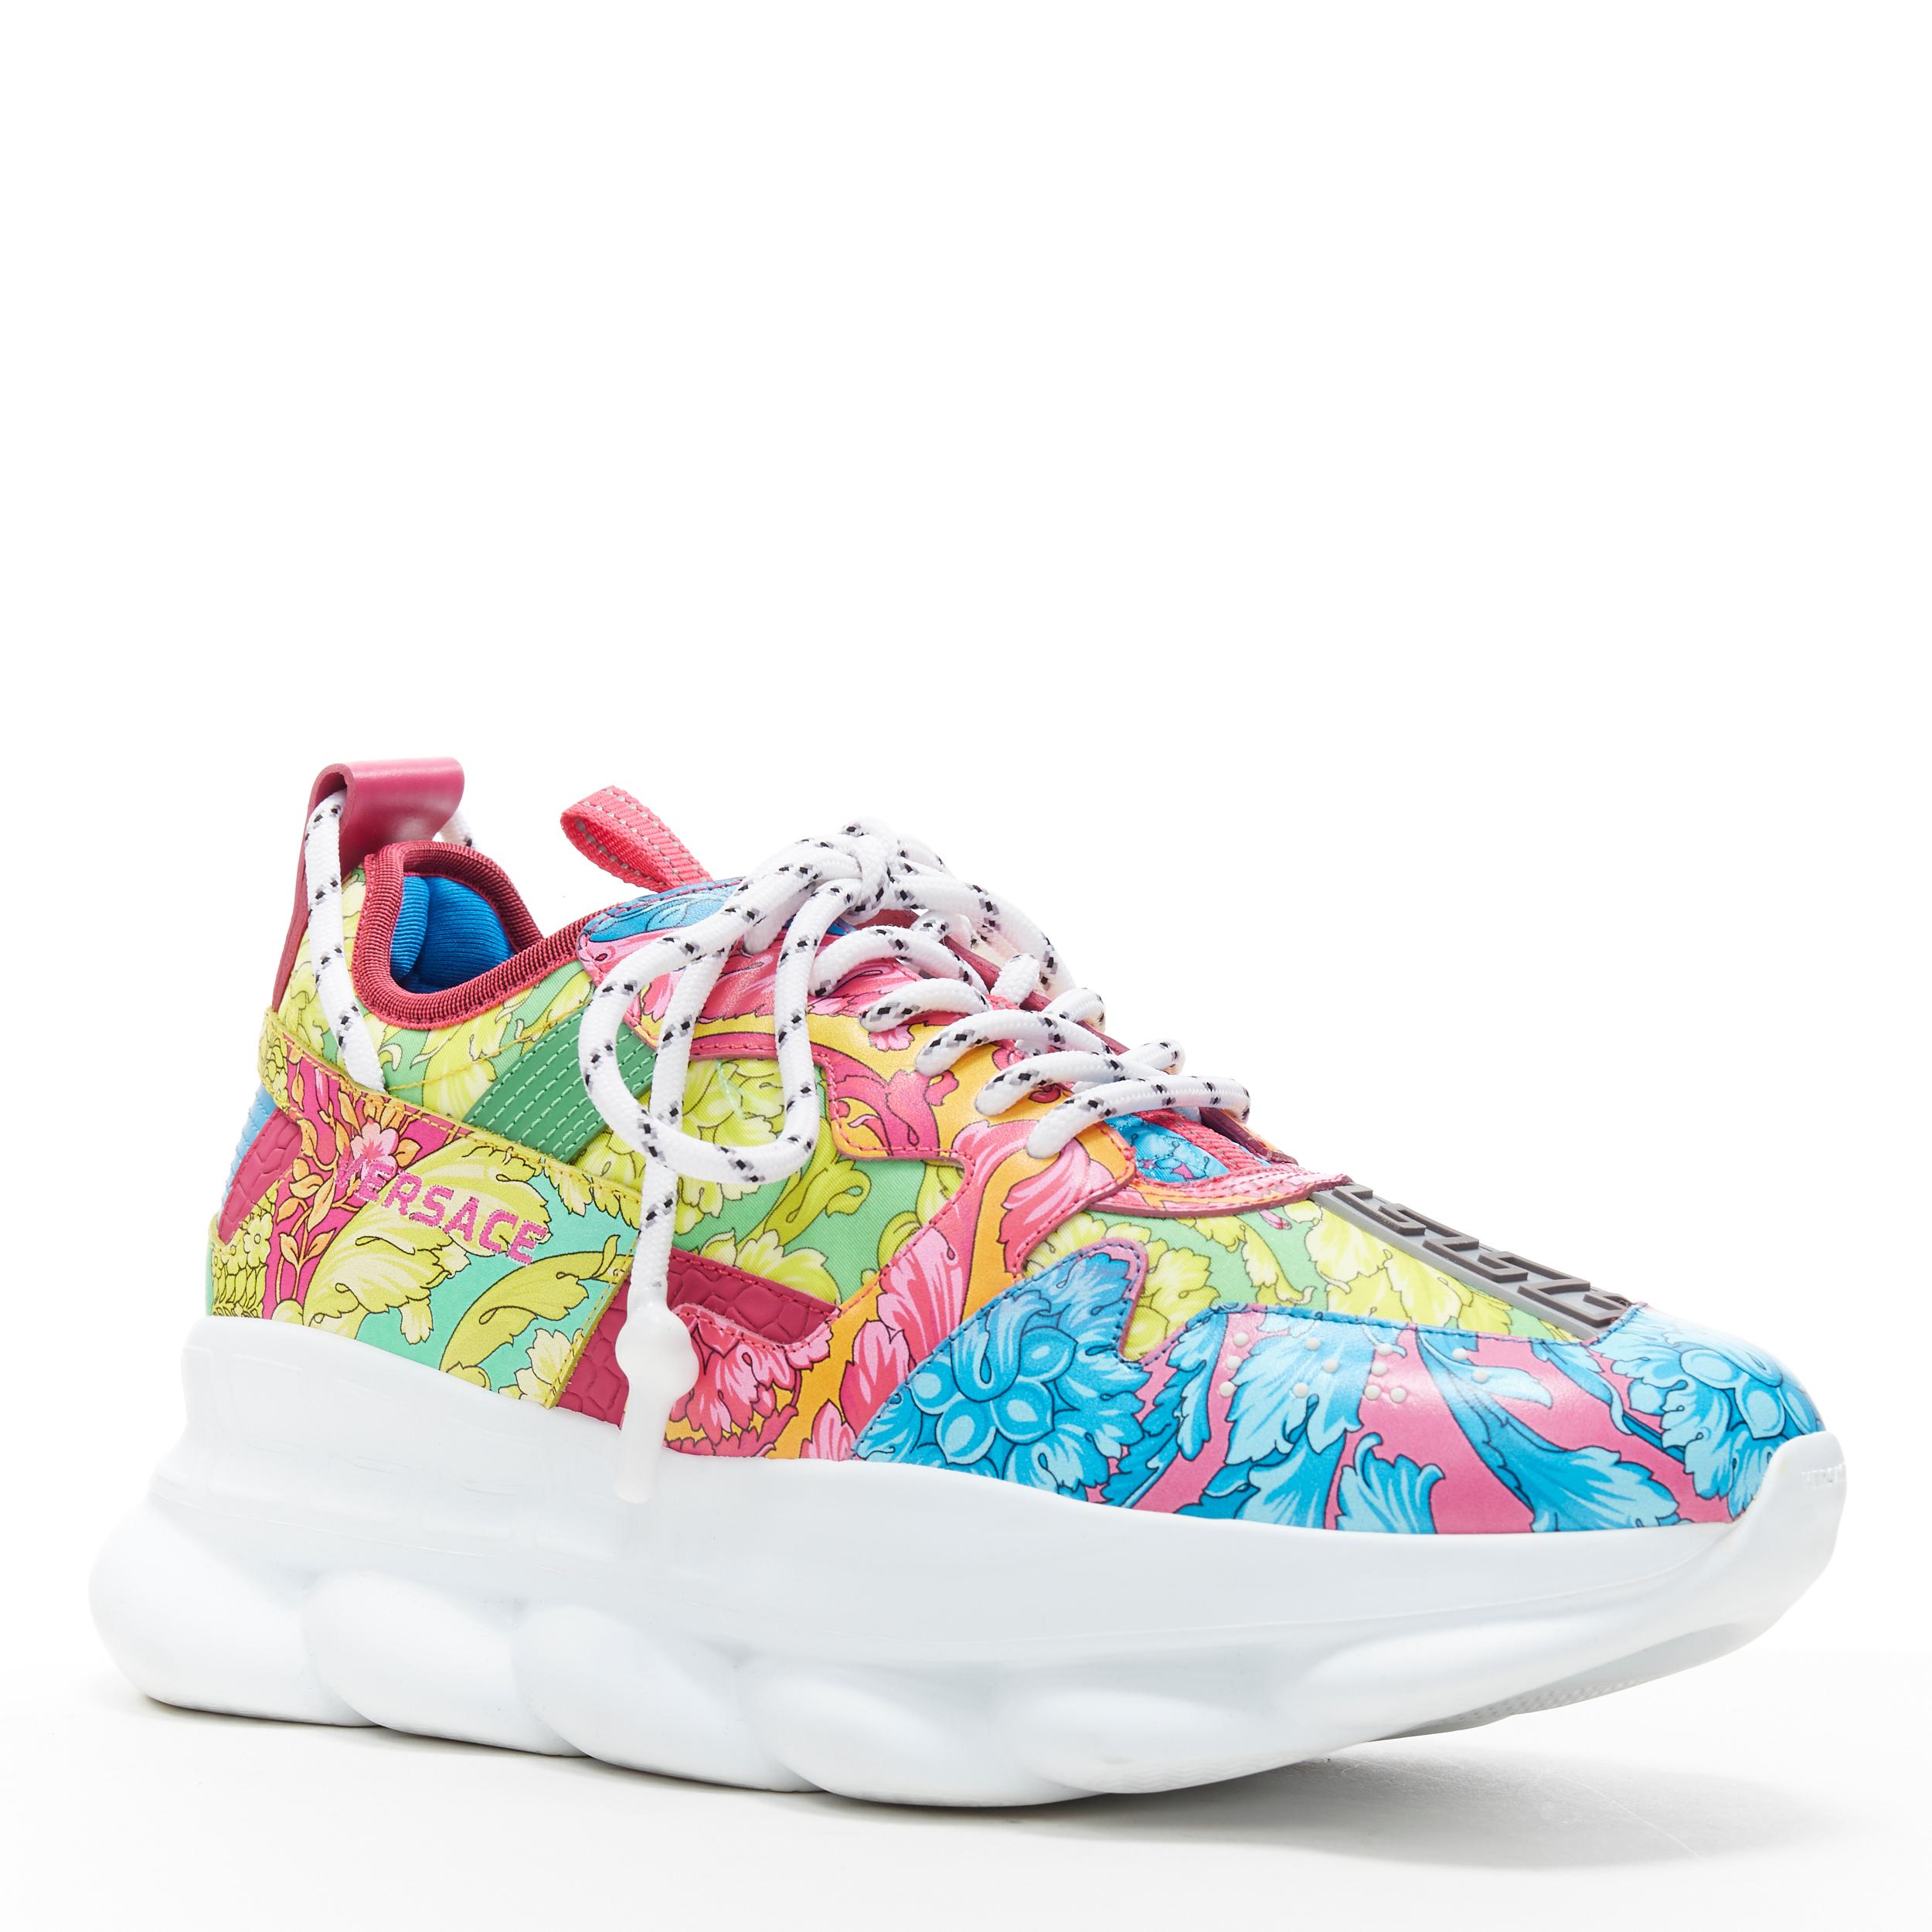 new VERSACE Chain Reaction Technicolor Baroque triple sole dad sneakers EU43
Brand: Versace
Designer: Donatella Versace
Model Name / Style: Chain Reaction
Material: Fabric
Color: Multicolour
Pattern: Floral; baroque floral
Closure: Lace up
Lining